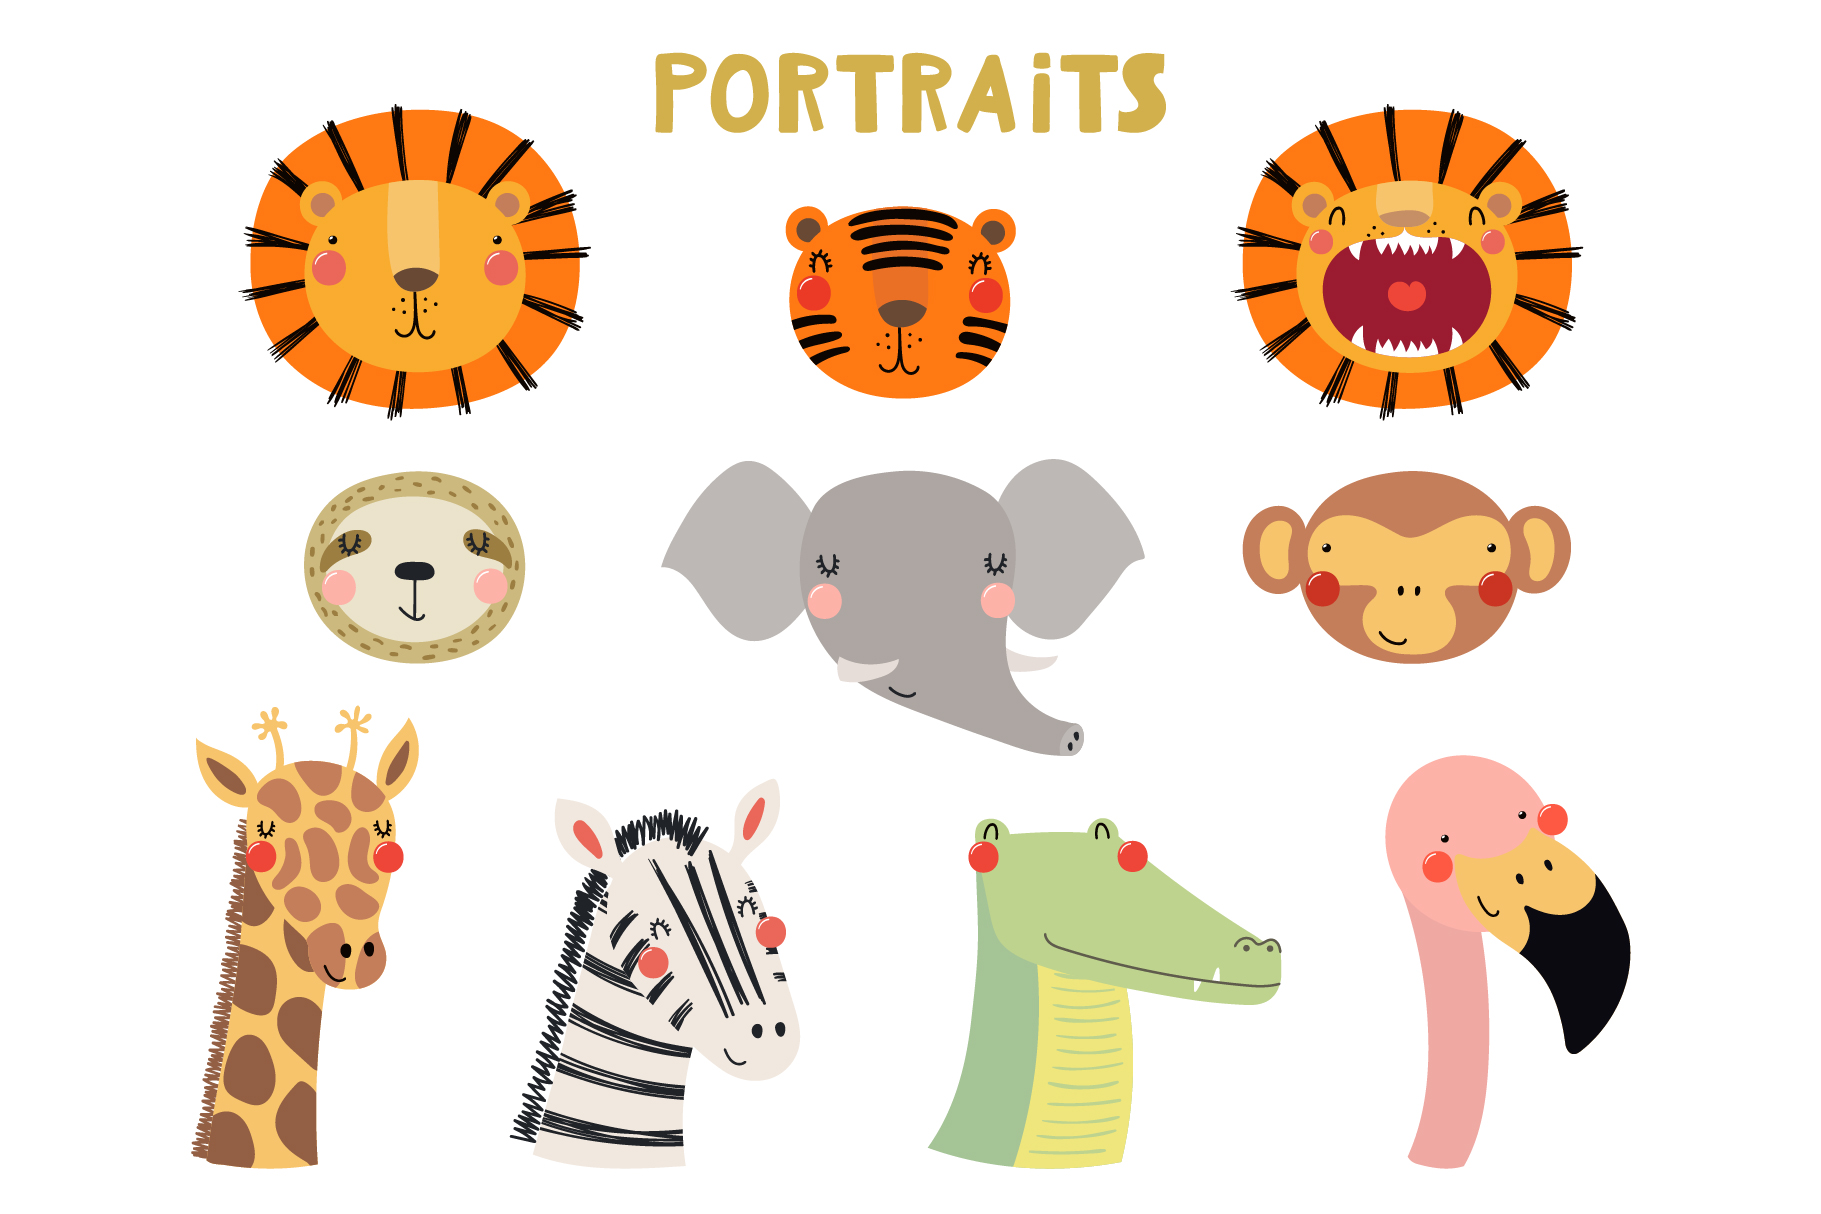 Heads of tiger, lion, zebra, crocodile and other animals.